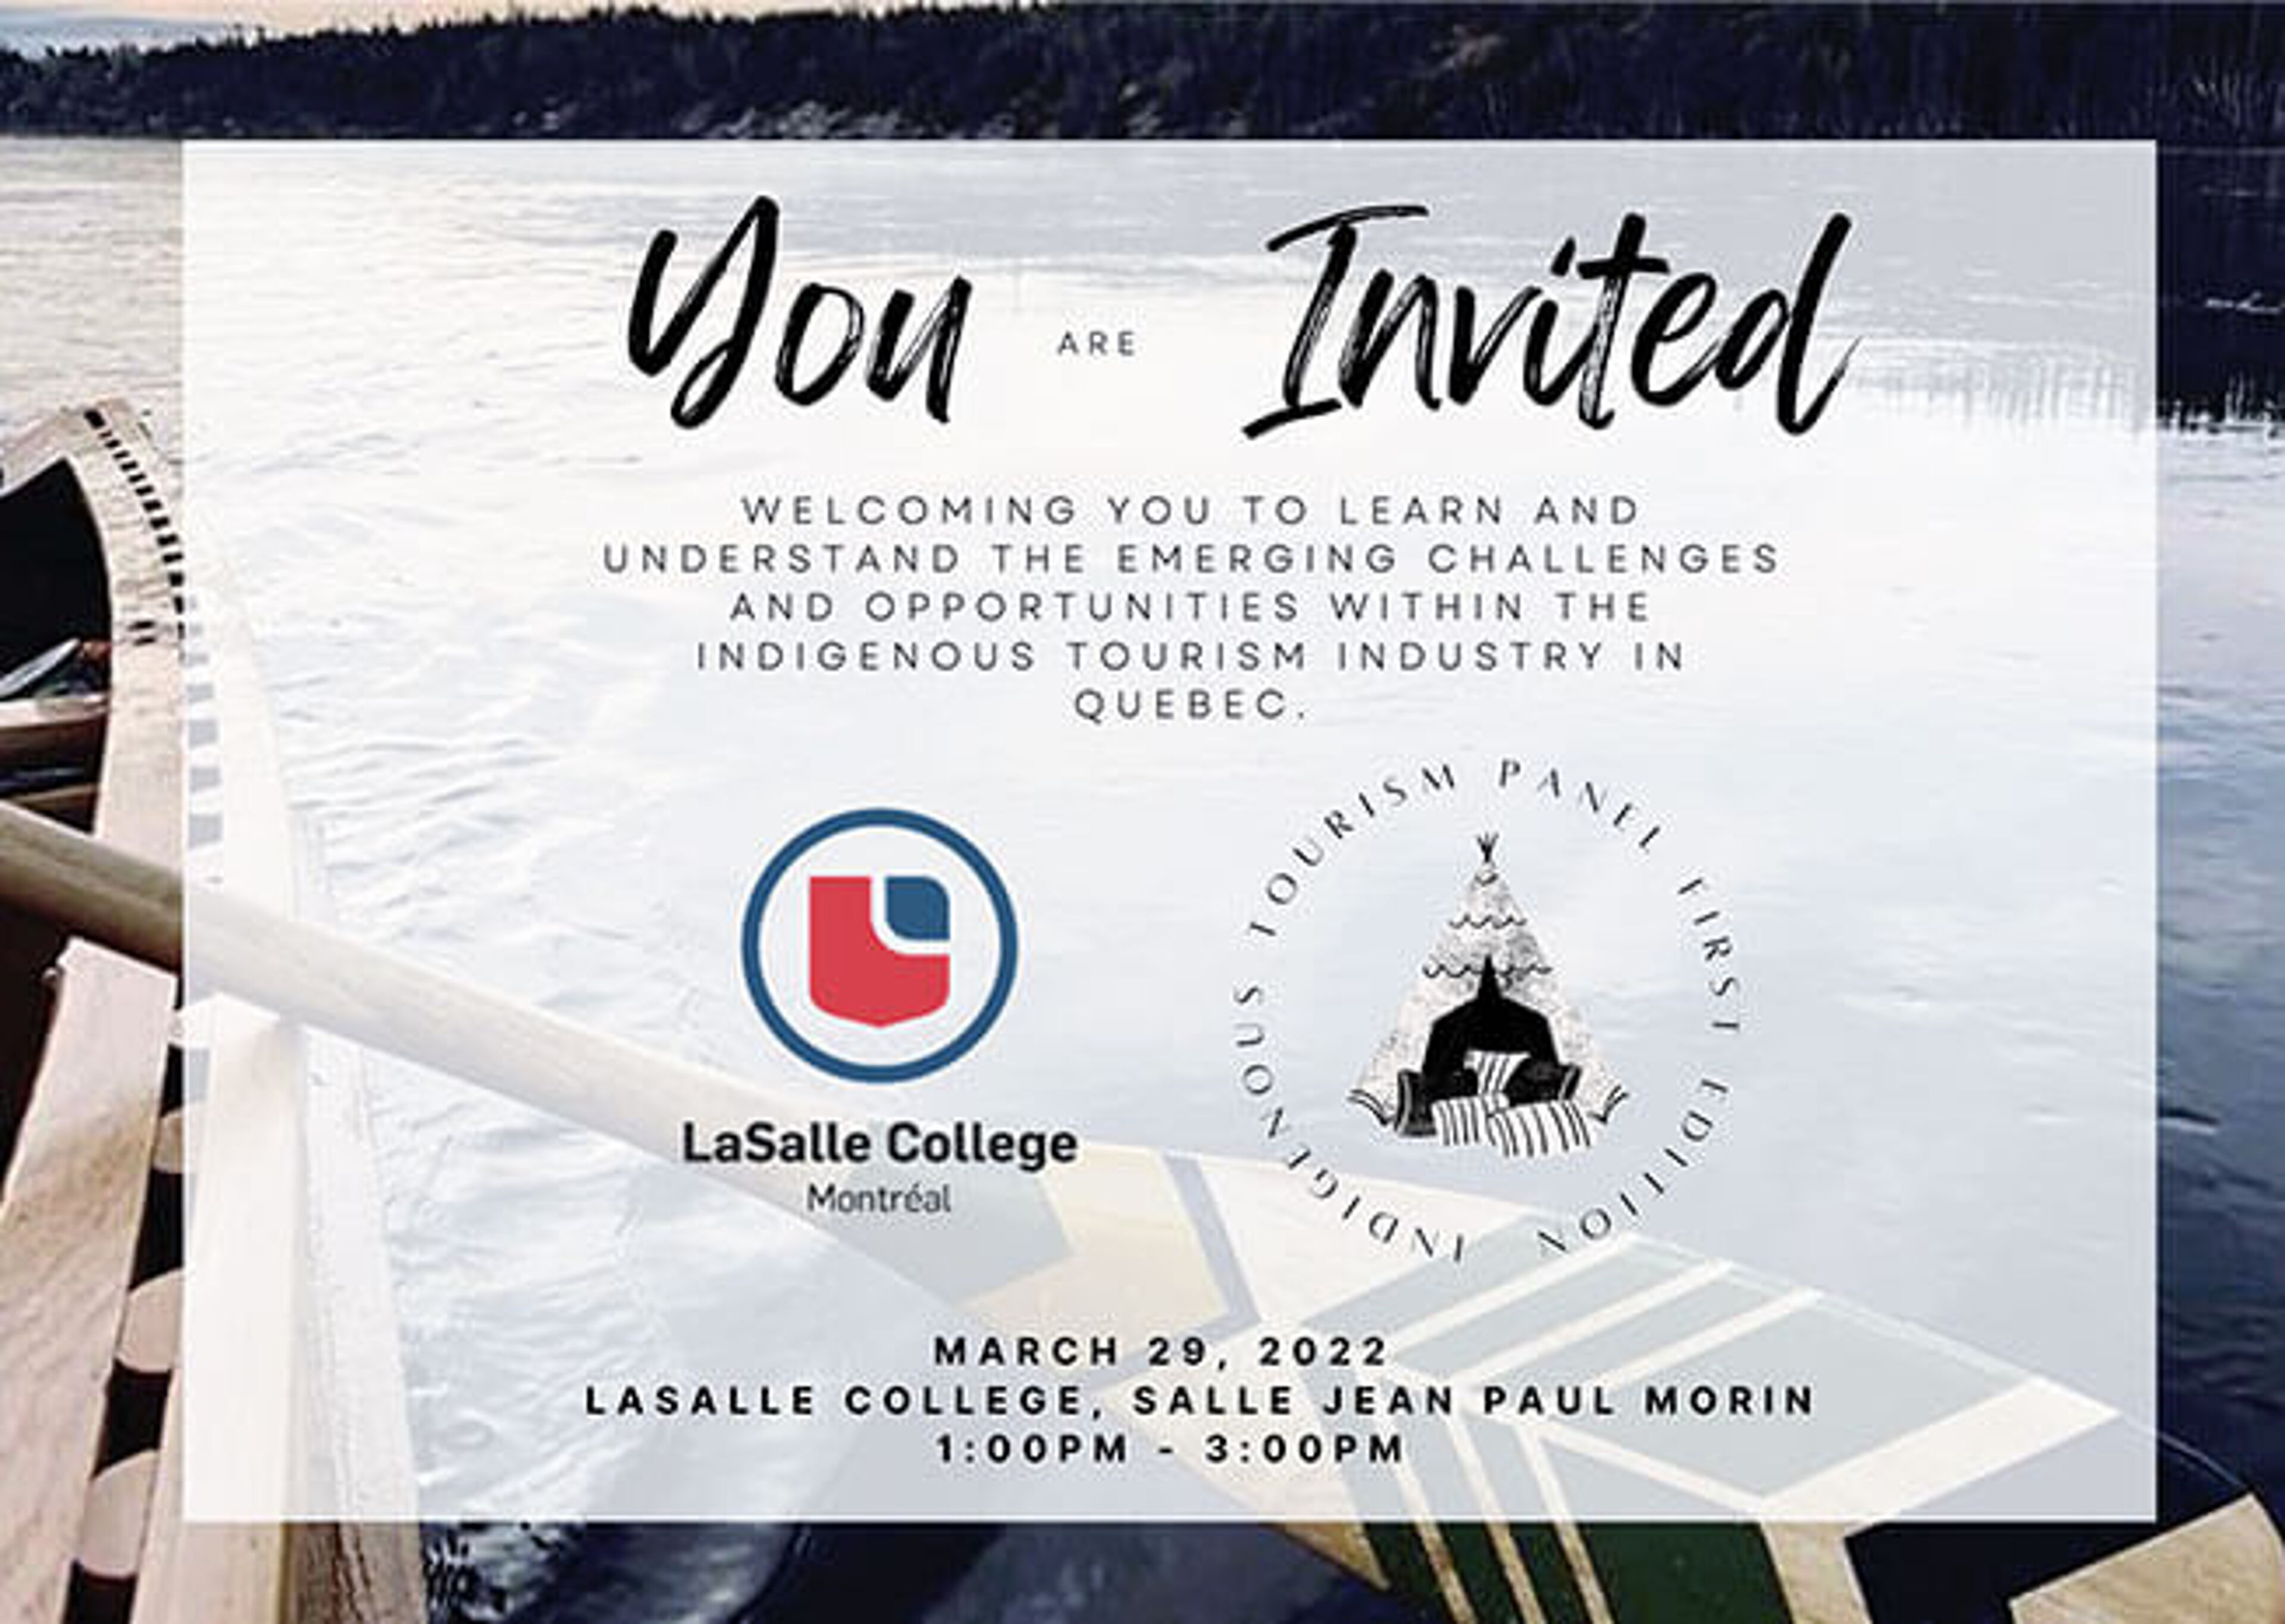 Invitation to an educational panel on Indigenous tourism in Quebec, organized by LaSalle College on March 29, 2022.